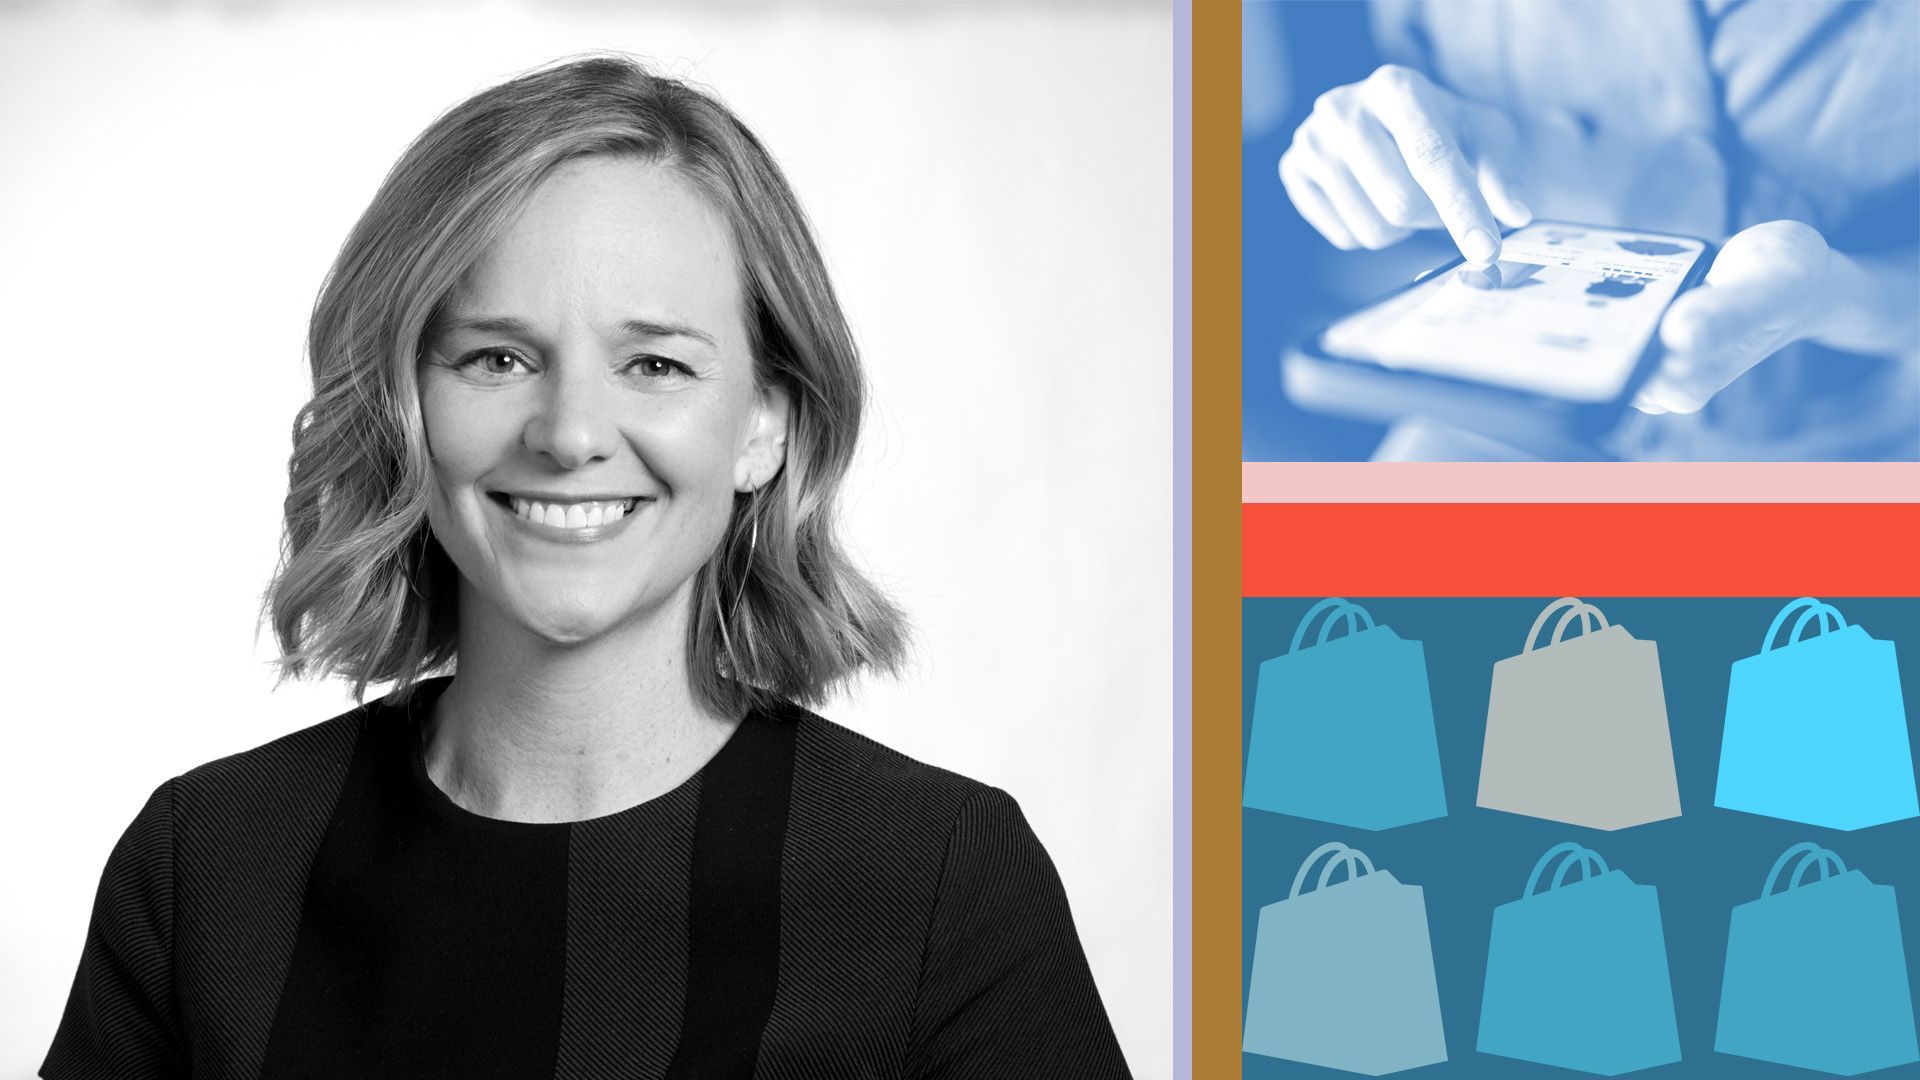 Photo illustration of Erin Pelton, Shopify's head of communications and public affairs, next to repeated Shopify logos and a photo of someone shopping on a phone